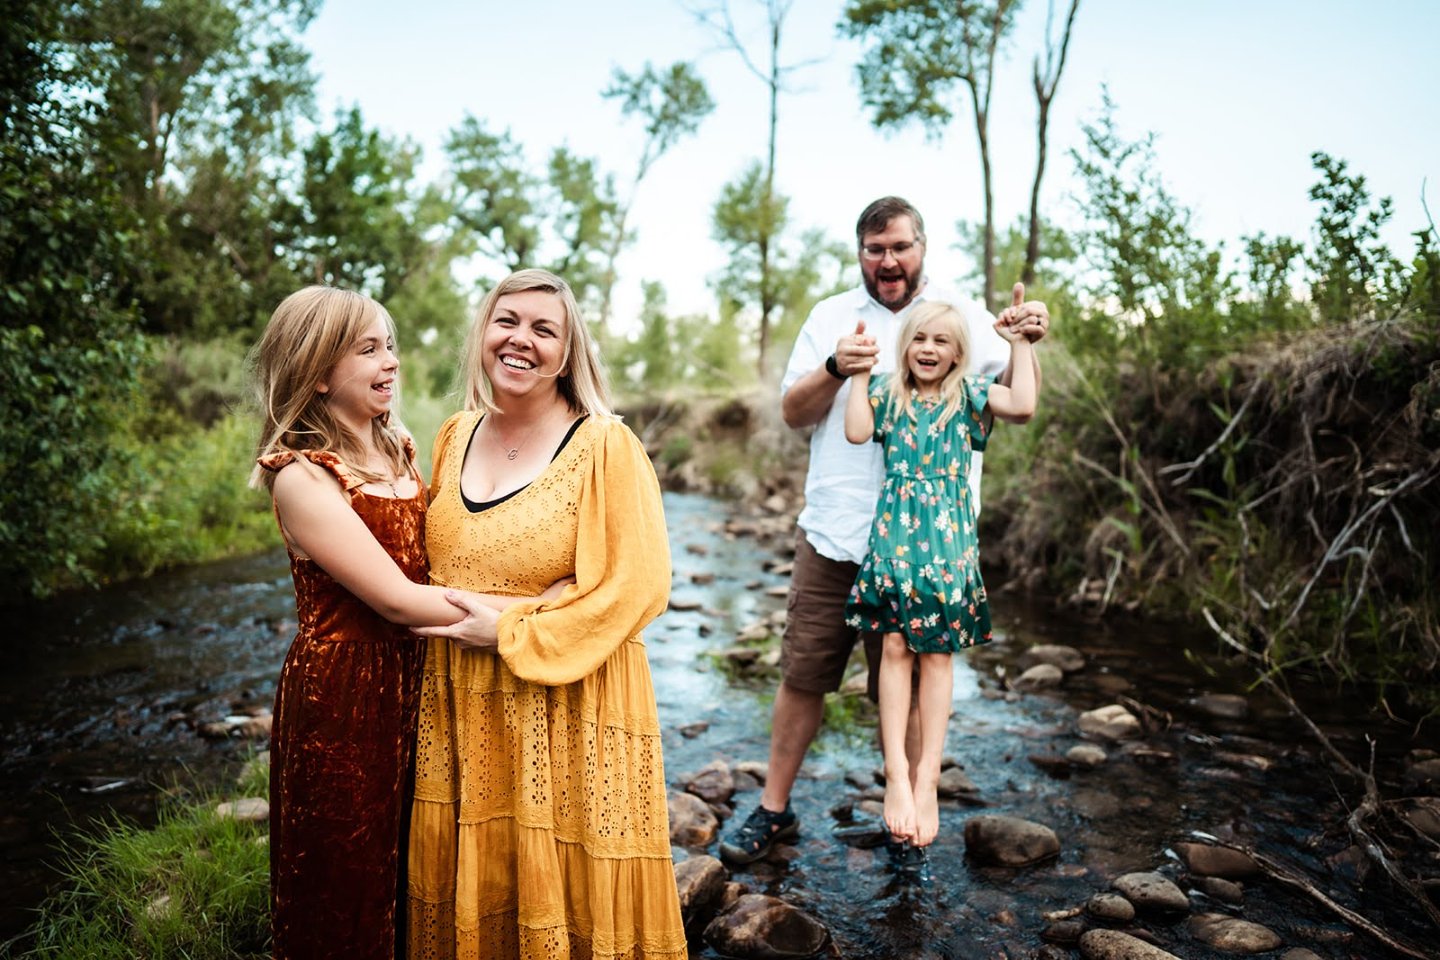 Warmer days are ahead, let's embrace the opportunity to immerse ourselves in nature with our little ones. Whether it's basking in the sunshine, exploring our mountains, or simply playing barefeet in the creek, let's capture these moments of connectio